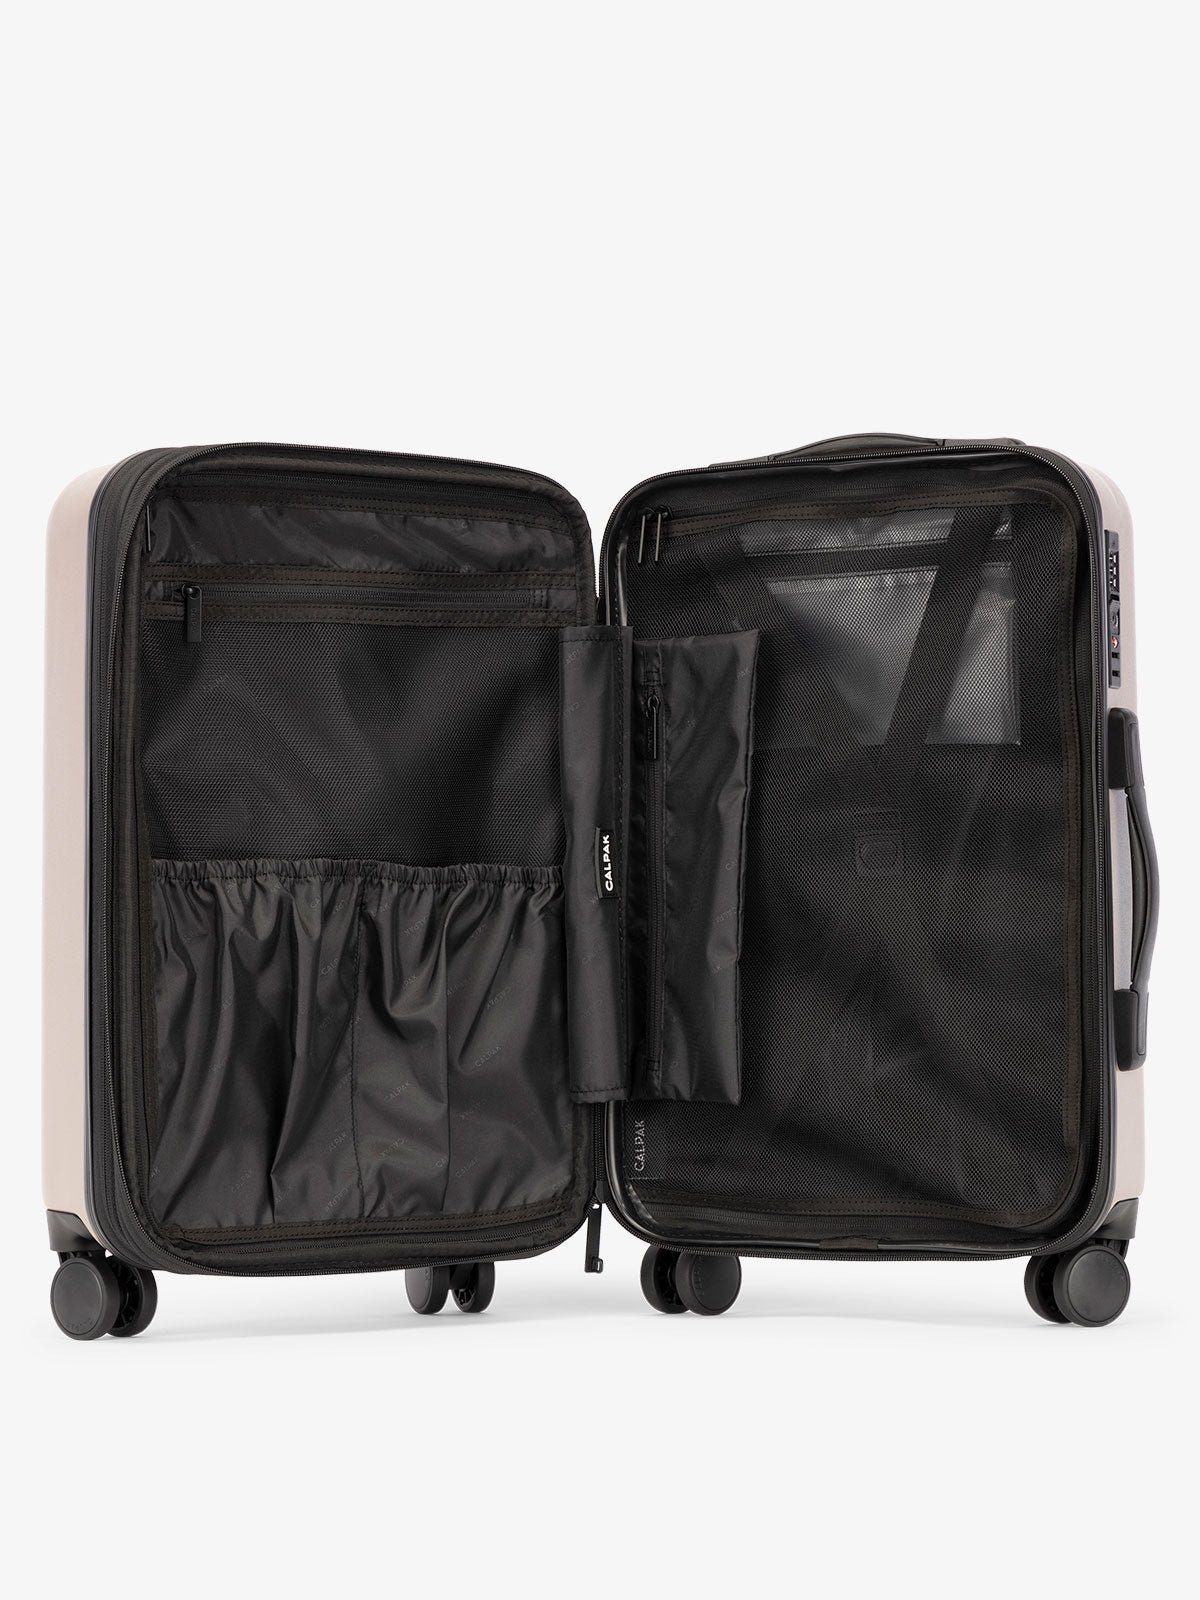 Brown CALPAK Evry Large Luggage features divided compartments with interior pockets for organized packing